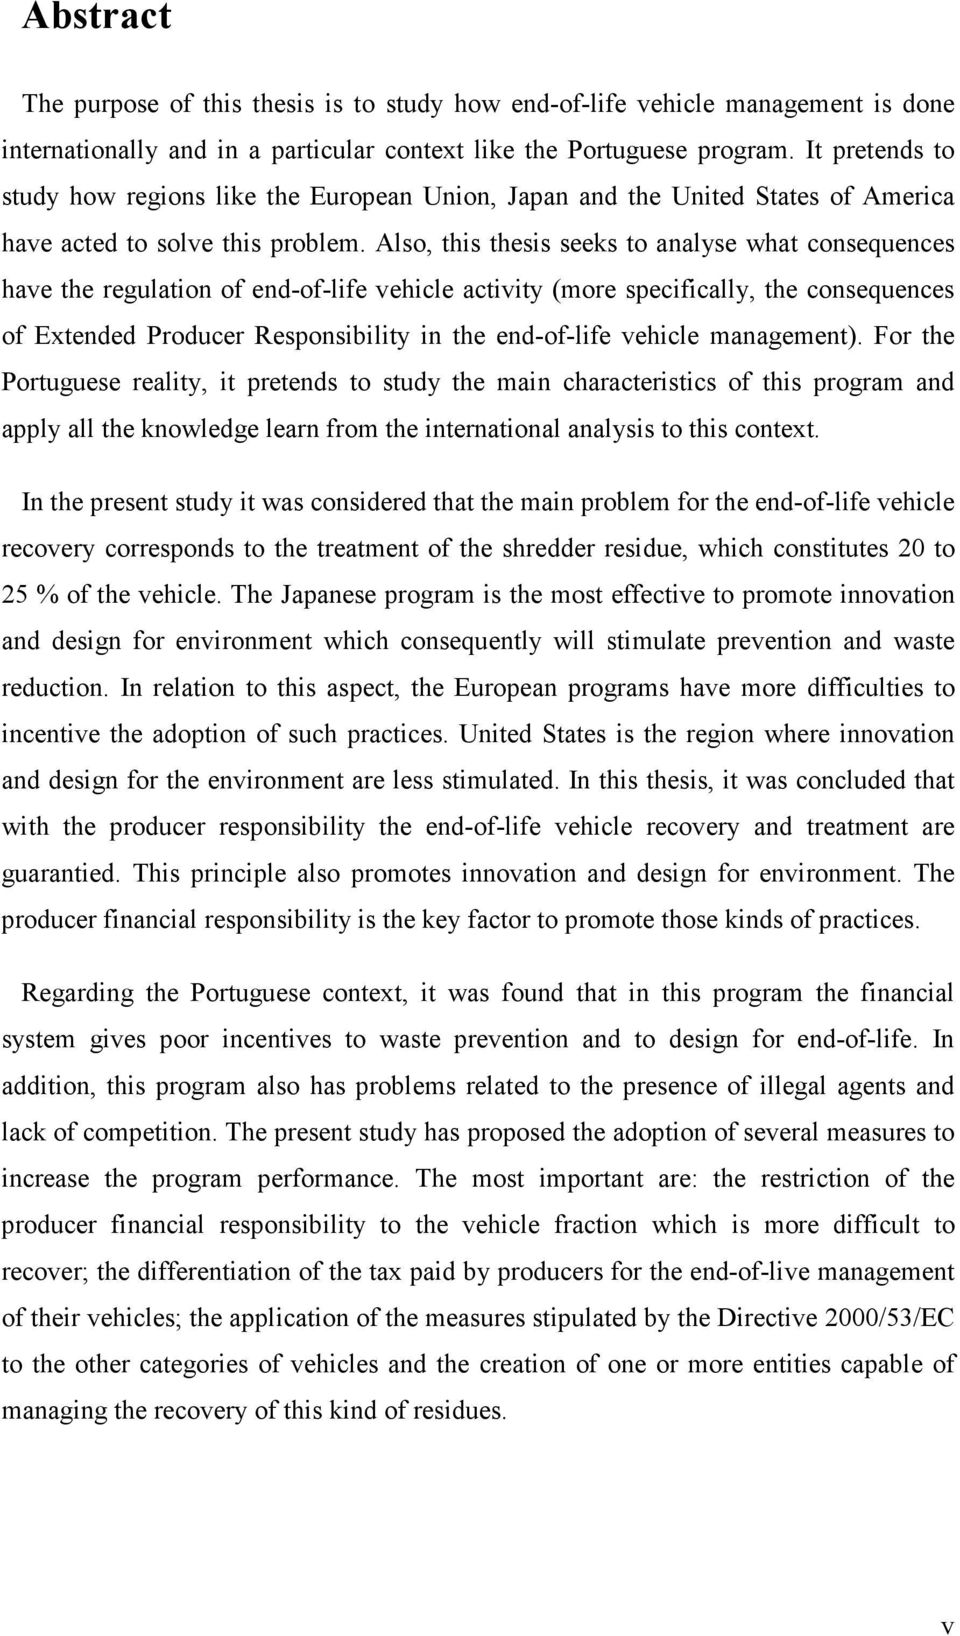 Also, this thesis seeks to analyse what consequences have the regulation of end-of-life vehicle activity (more specifically, the consequences of Extended Producer Responsibility in the end-of-life